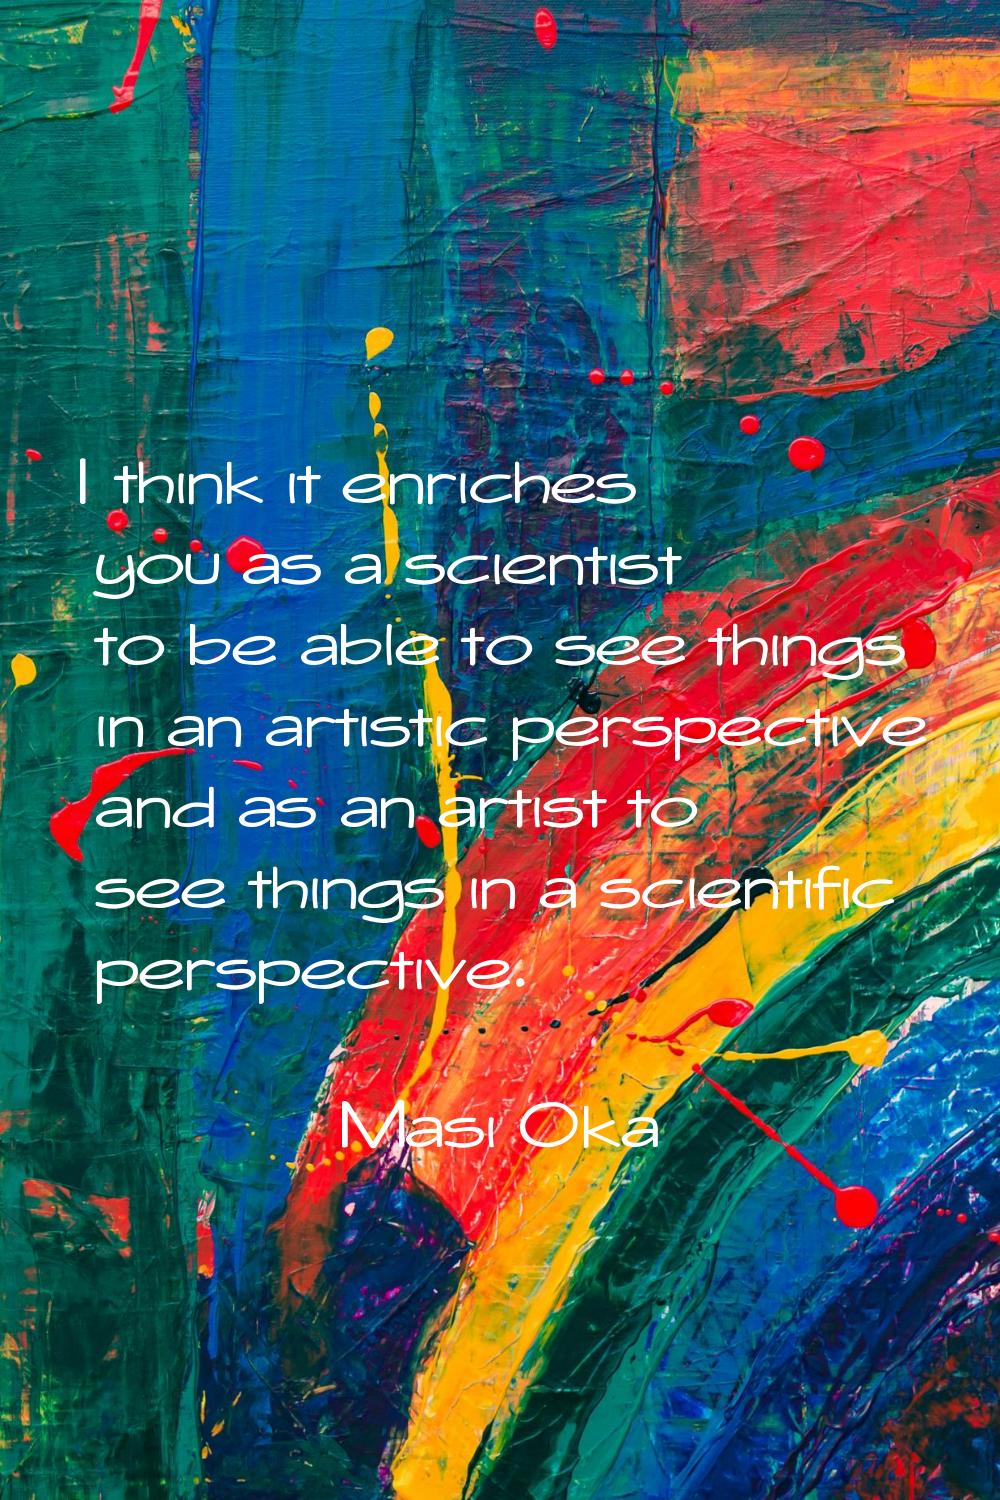 I think it enriches you as a scientist to be able to see things in an artistic perspective and as a